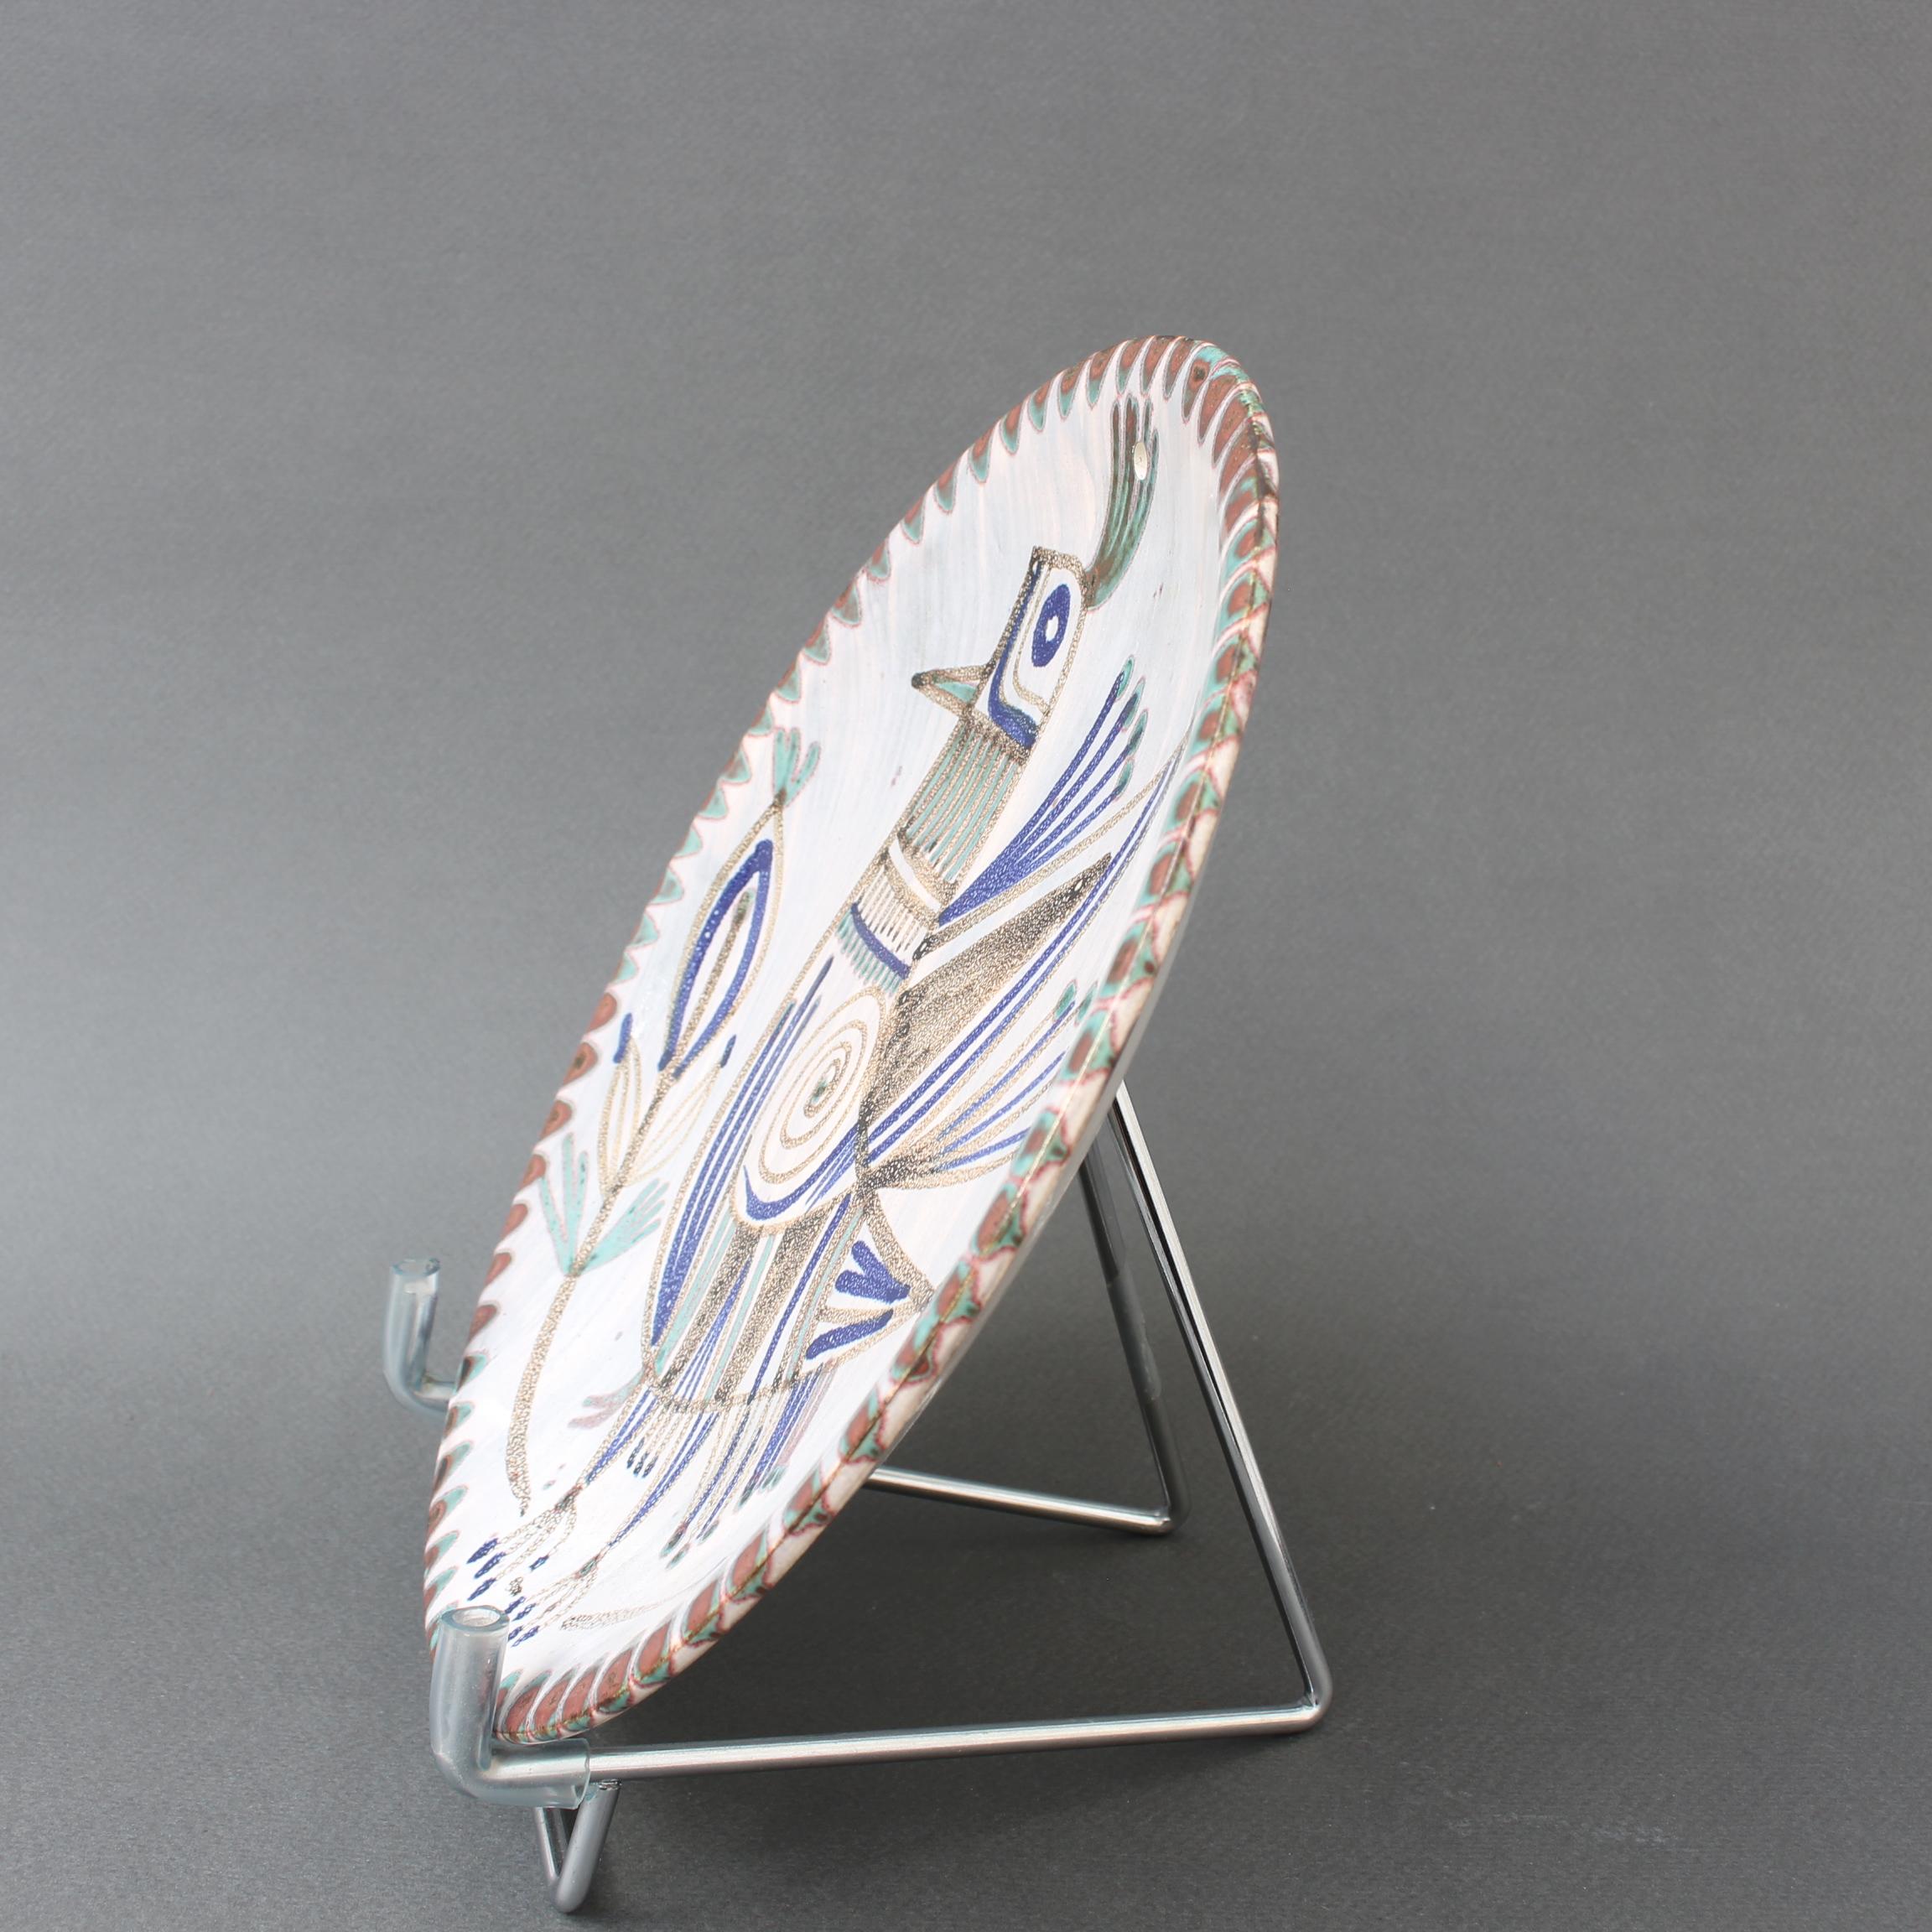 Hand-Painted Vintage French Ceramic Decorative Plate by Le Mûrier 'circa 1960s'